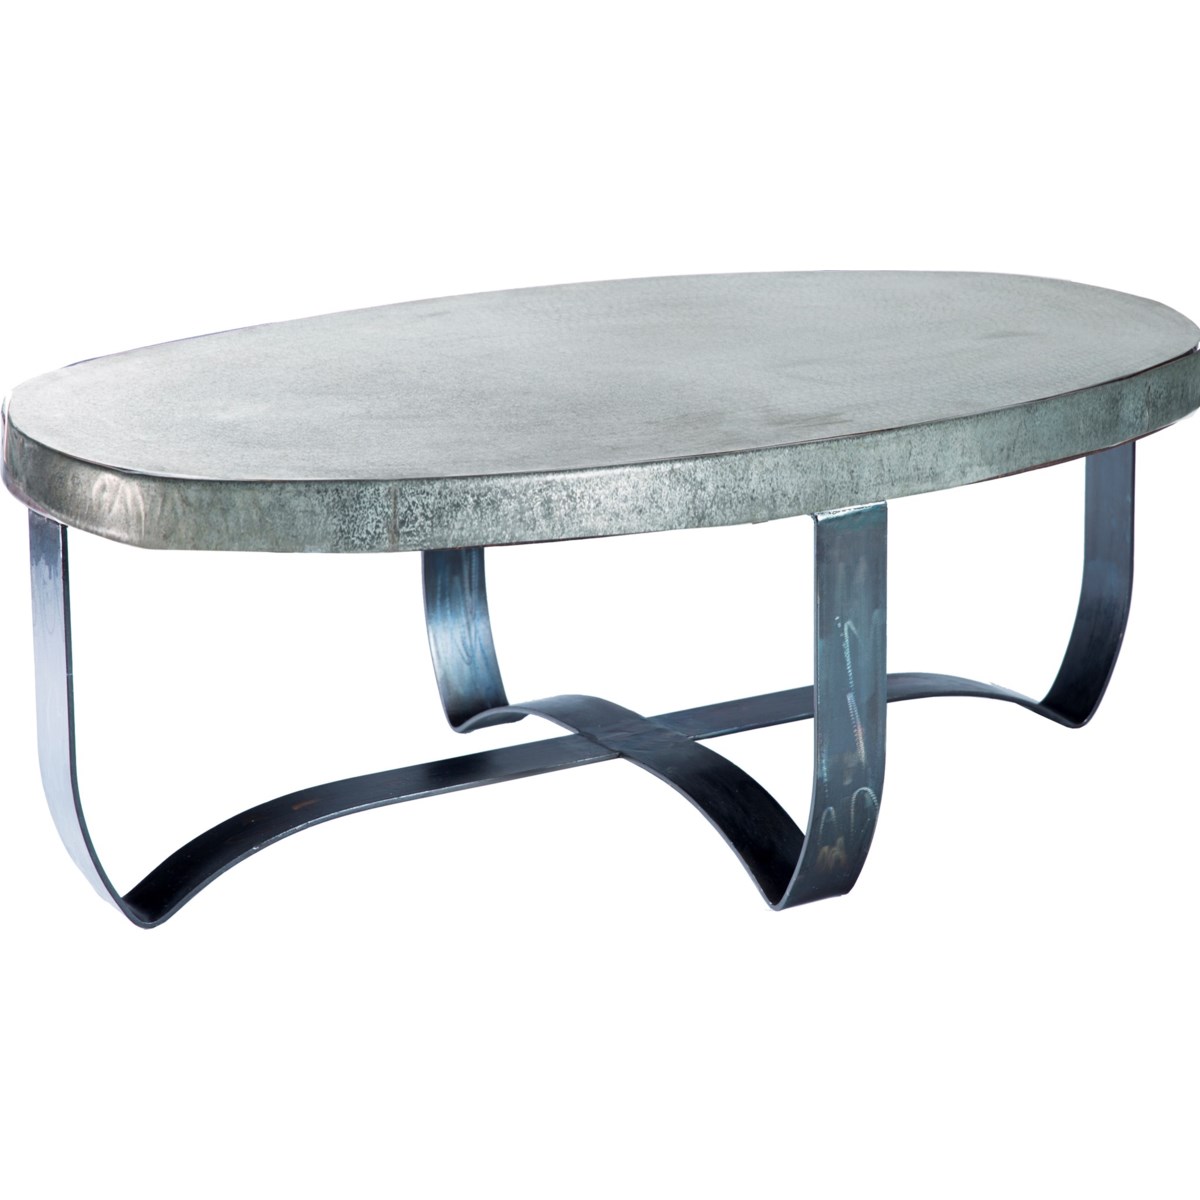 Round Strap Coffee Table with Hammered Zinc Top